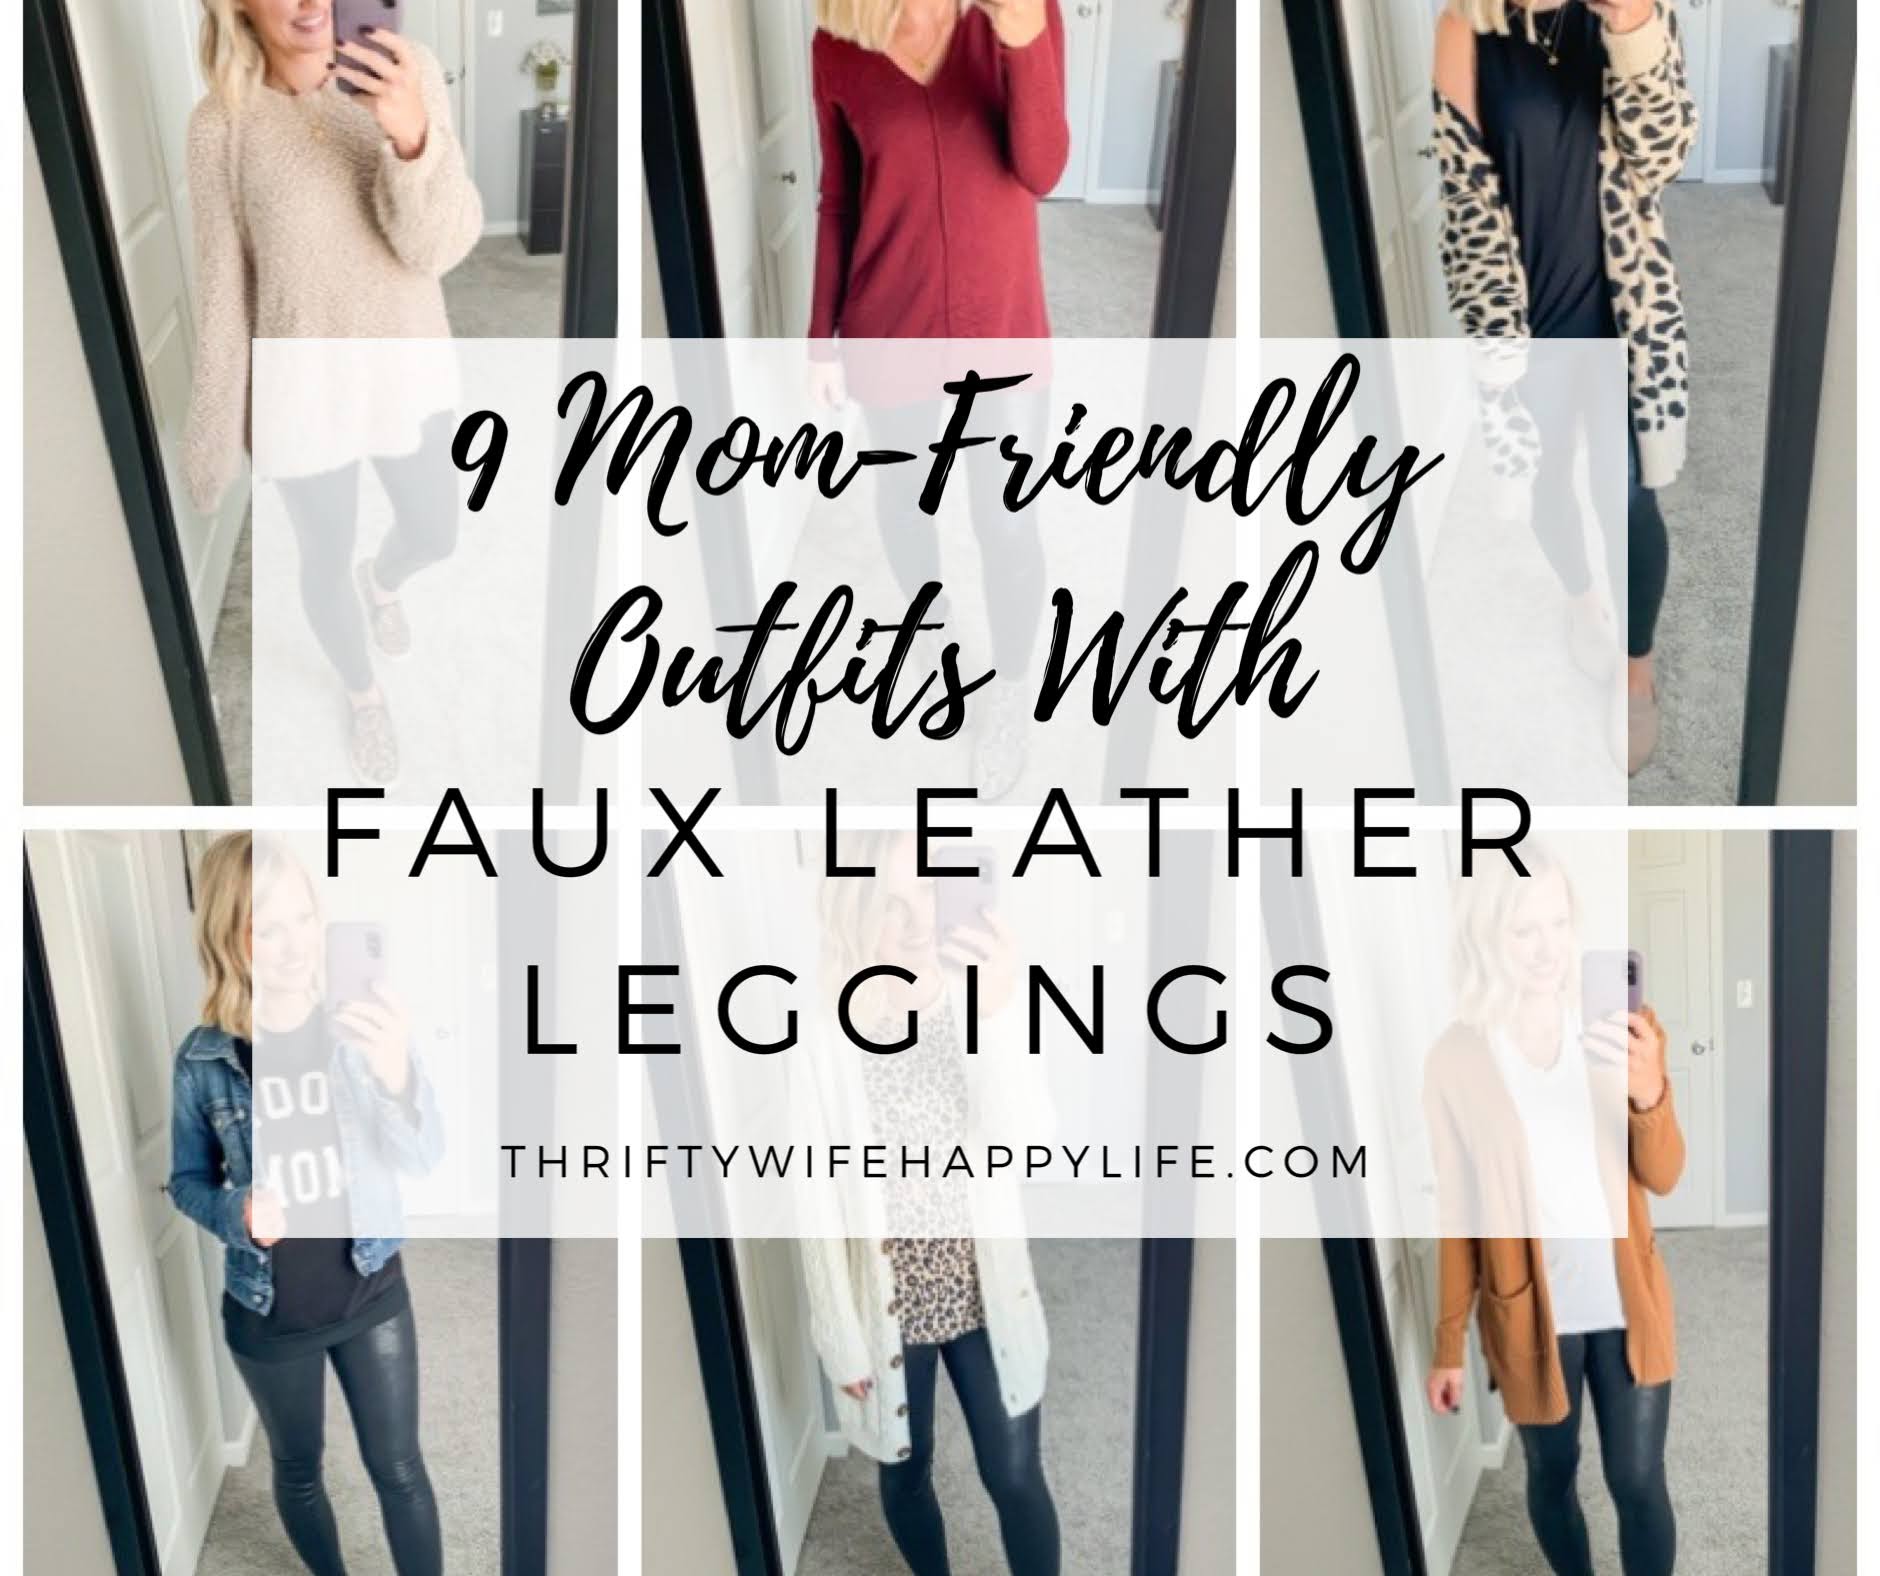 9 Mom-Friendly Outfits With Faux Leather Leggings - Thrifty Wife